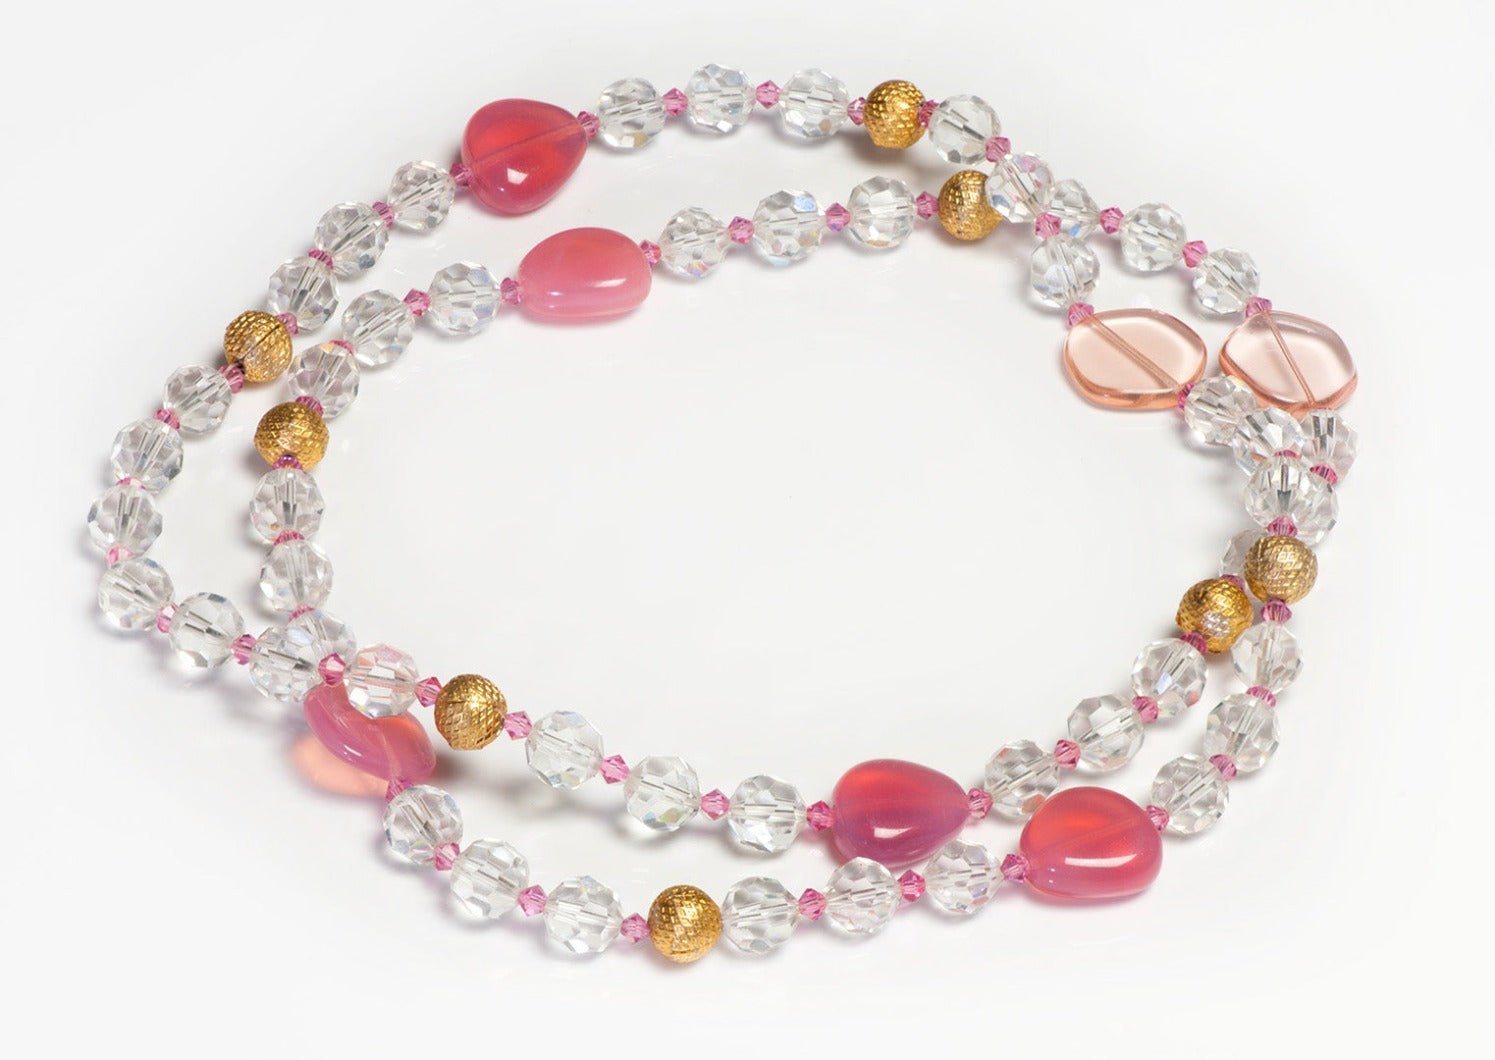 Vintage AB Crystal Glass Beads Pink Lucite Sautoir Necklace